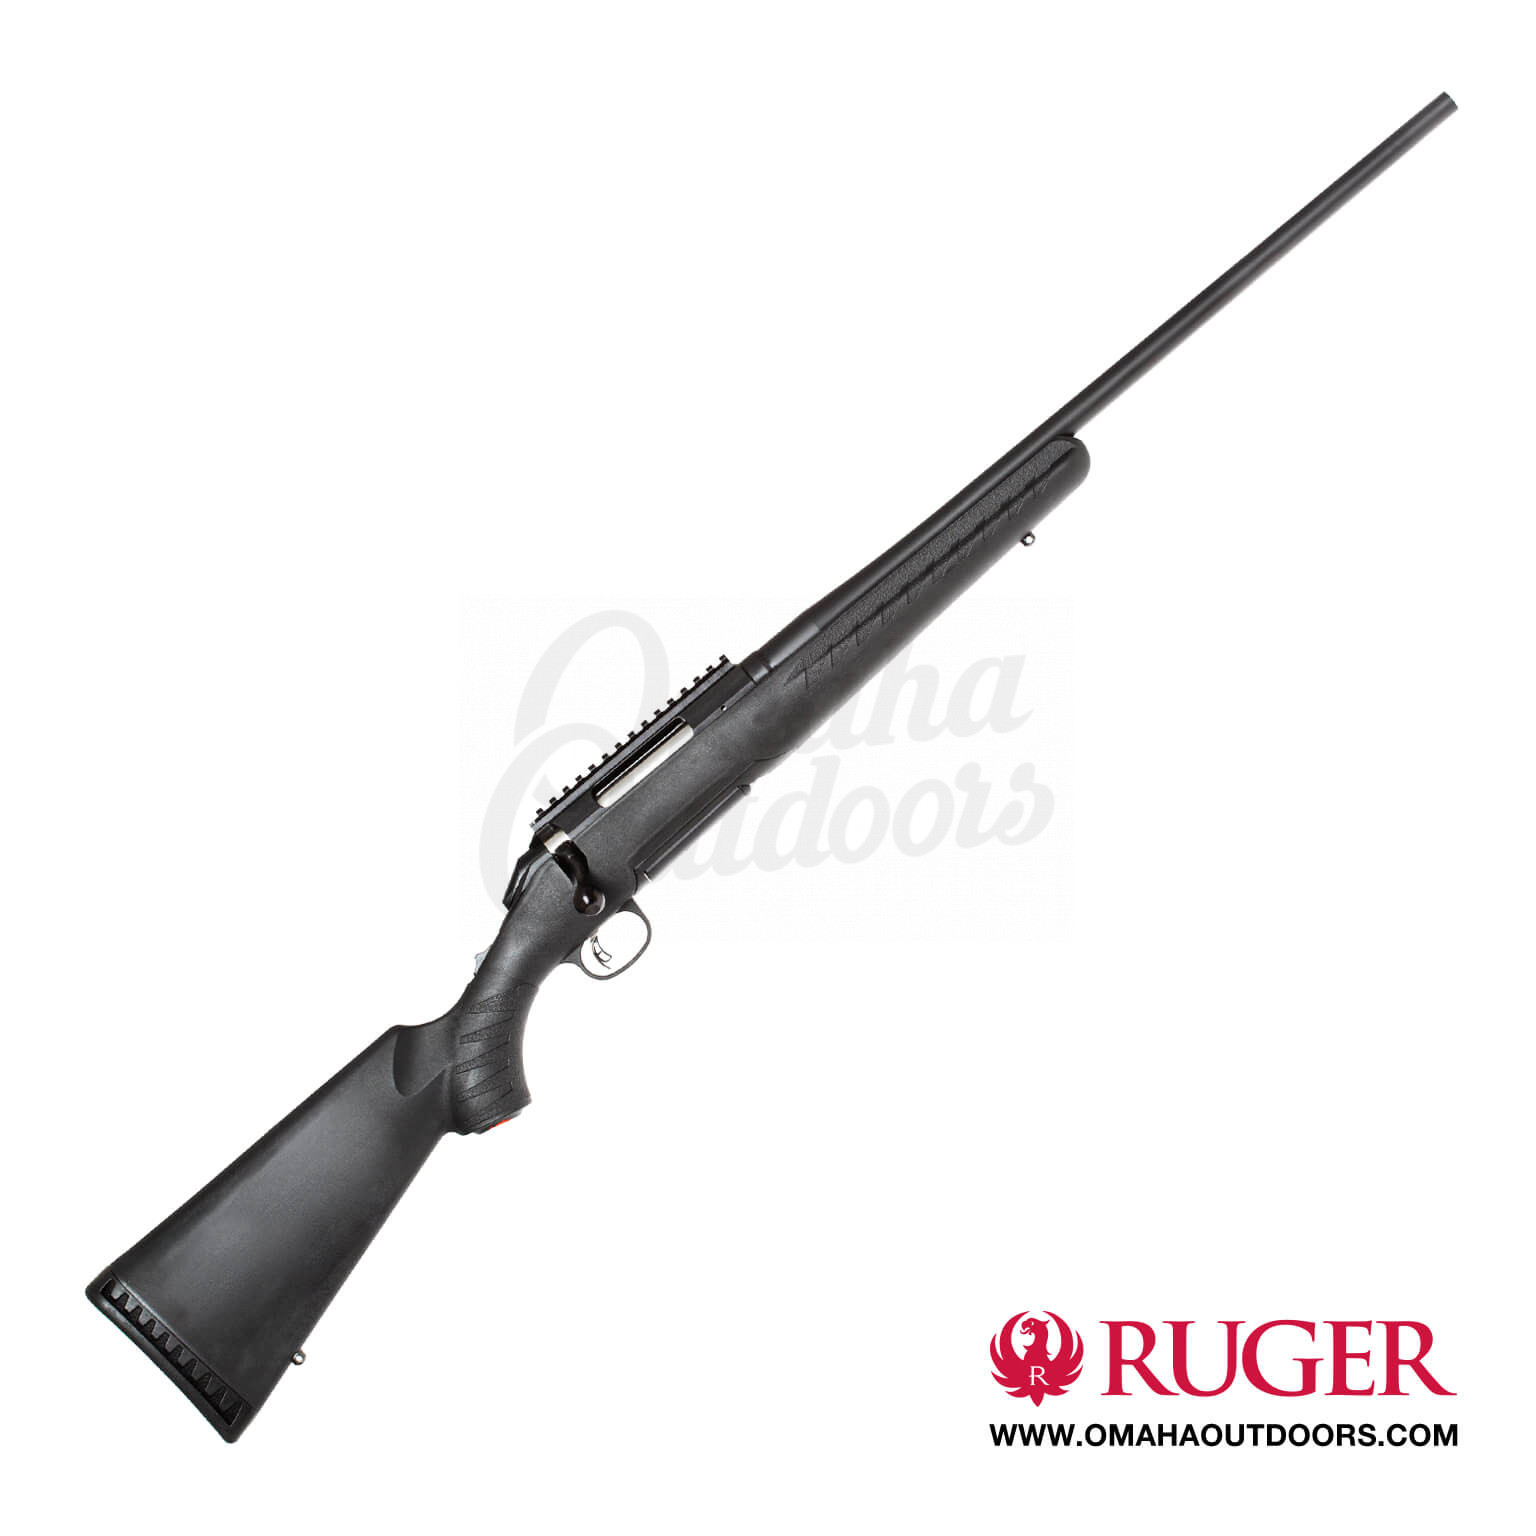 Ruger American Rifle Compact Creedmoor Bolt Action Rd Rifle My Xxx Hot Girl 1513